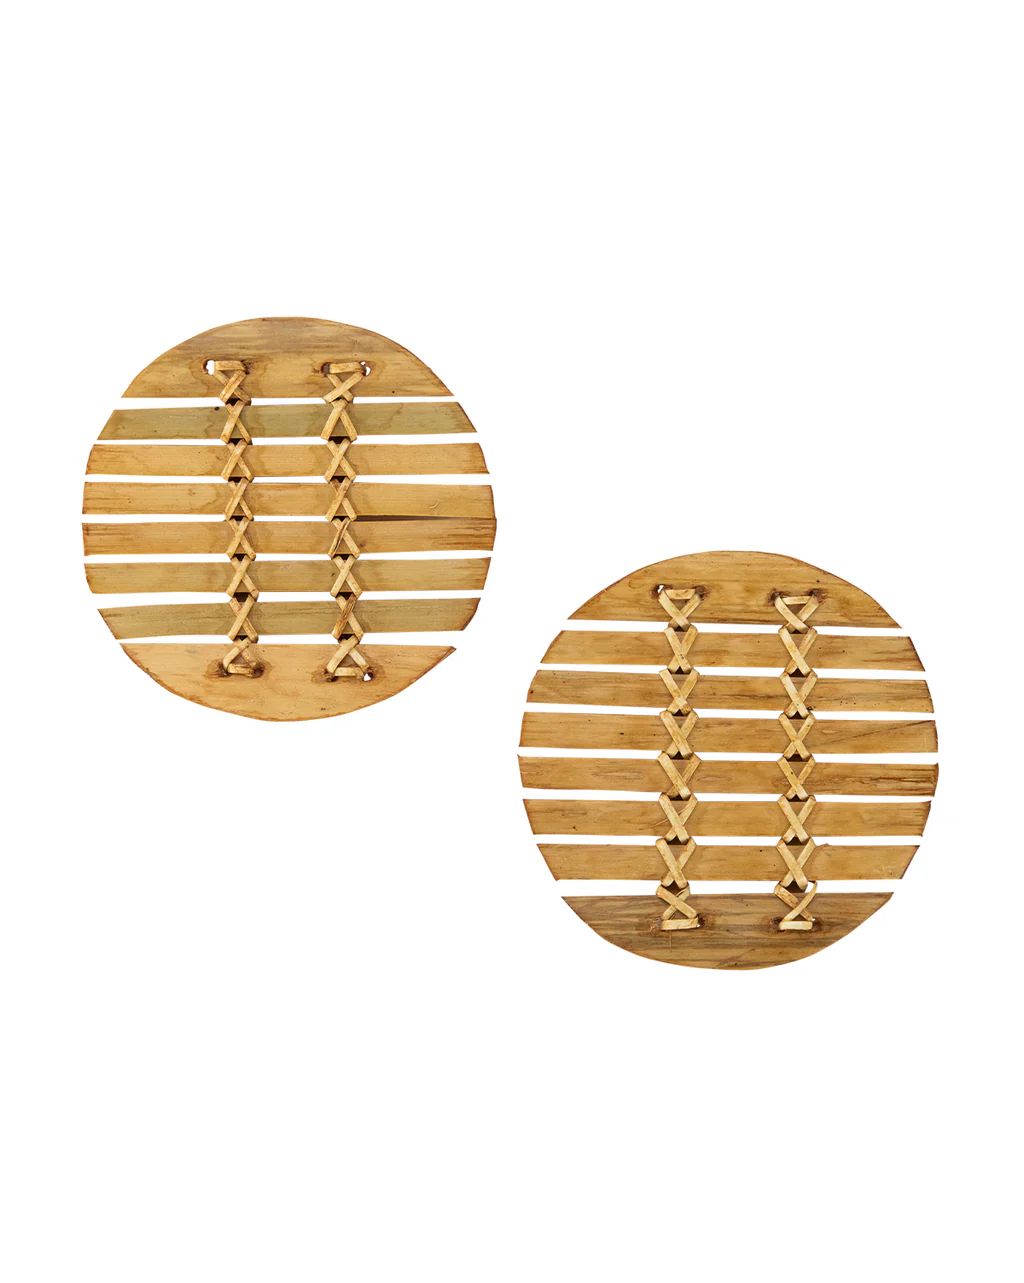 Bamboo Stitched Coasters (Set of 6) | McGee & Co.